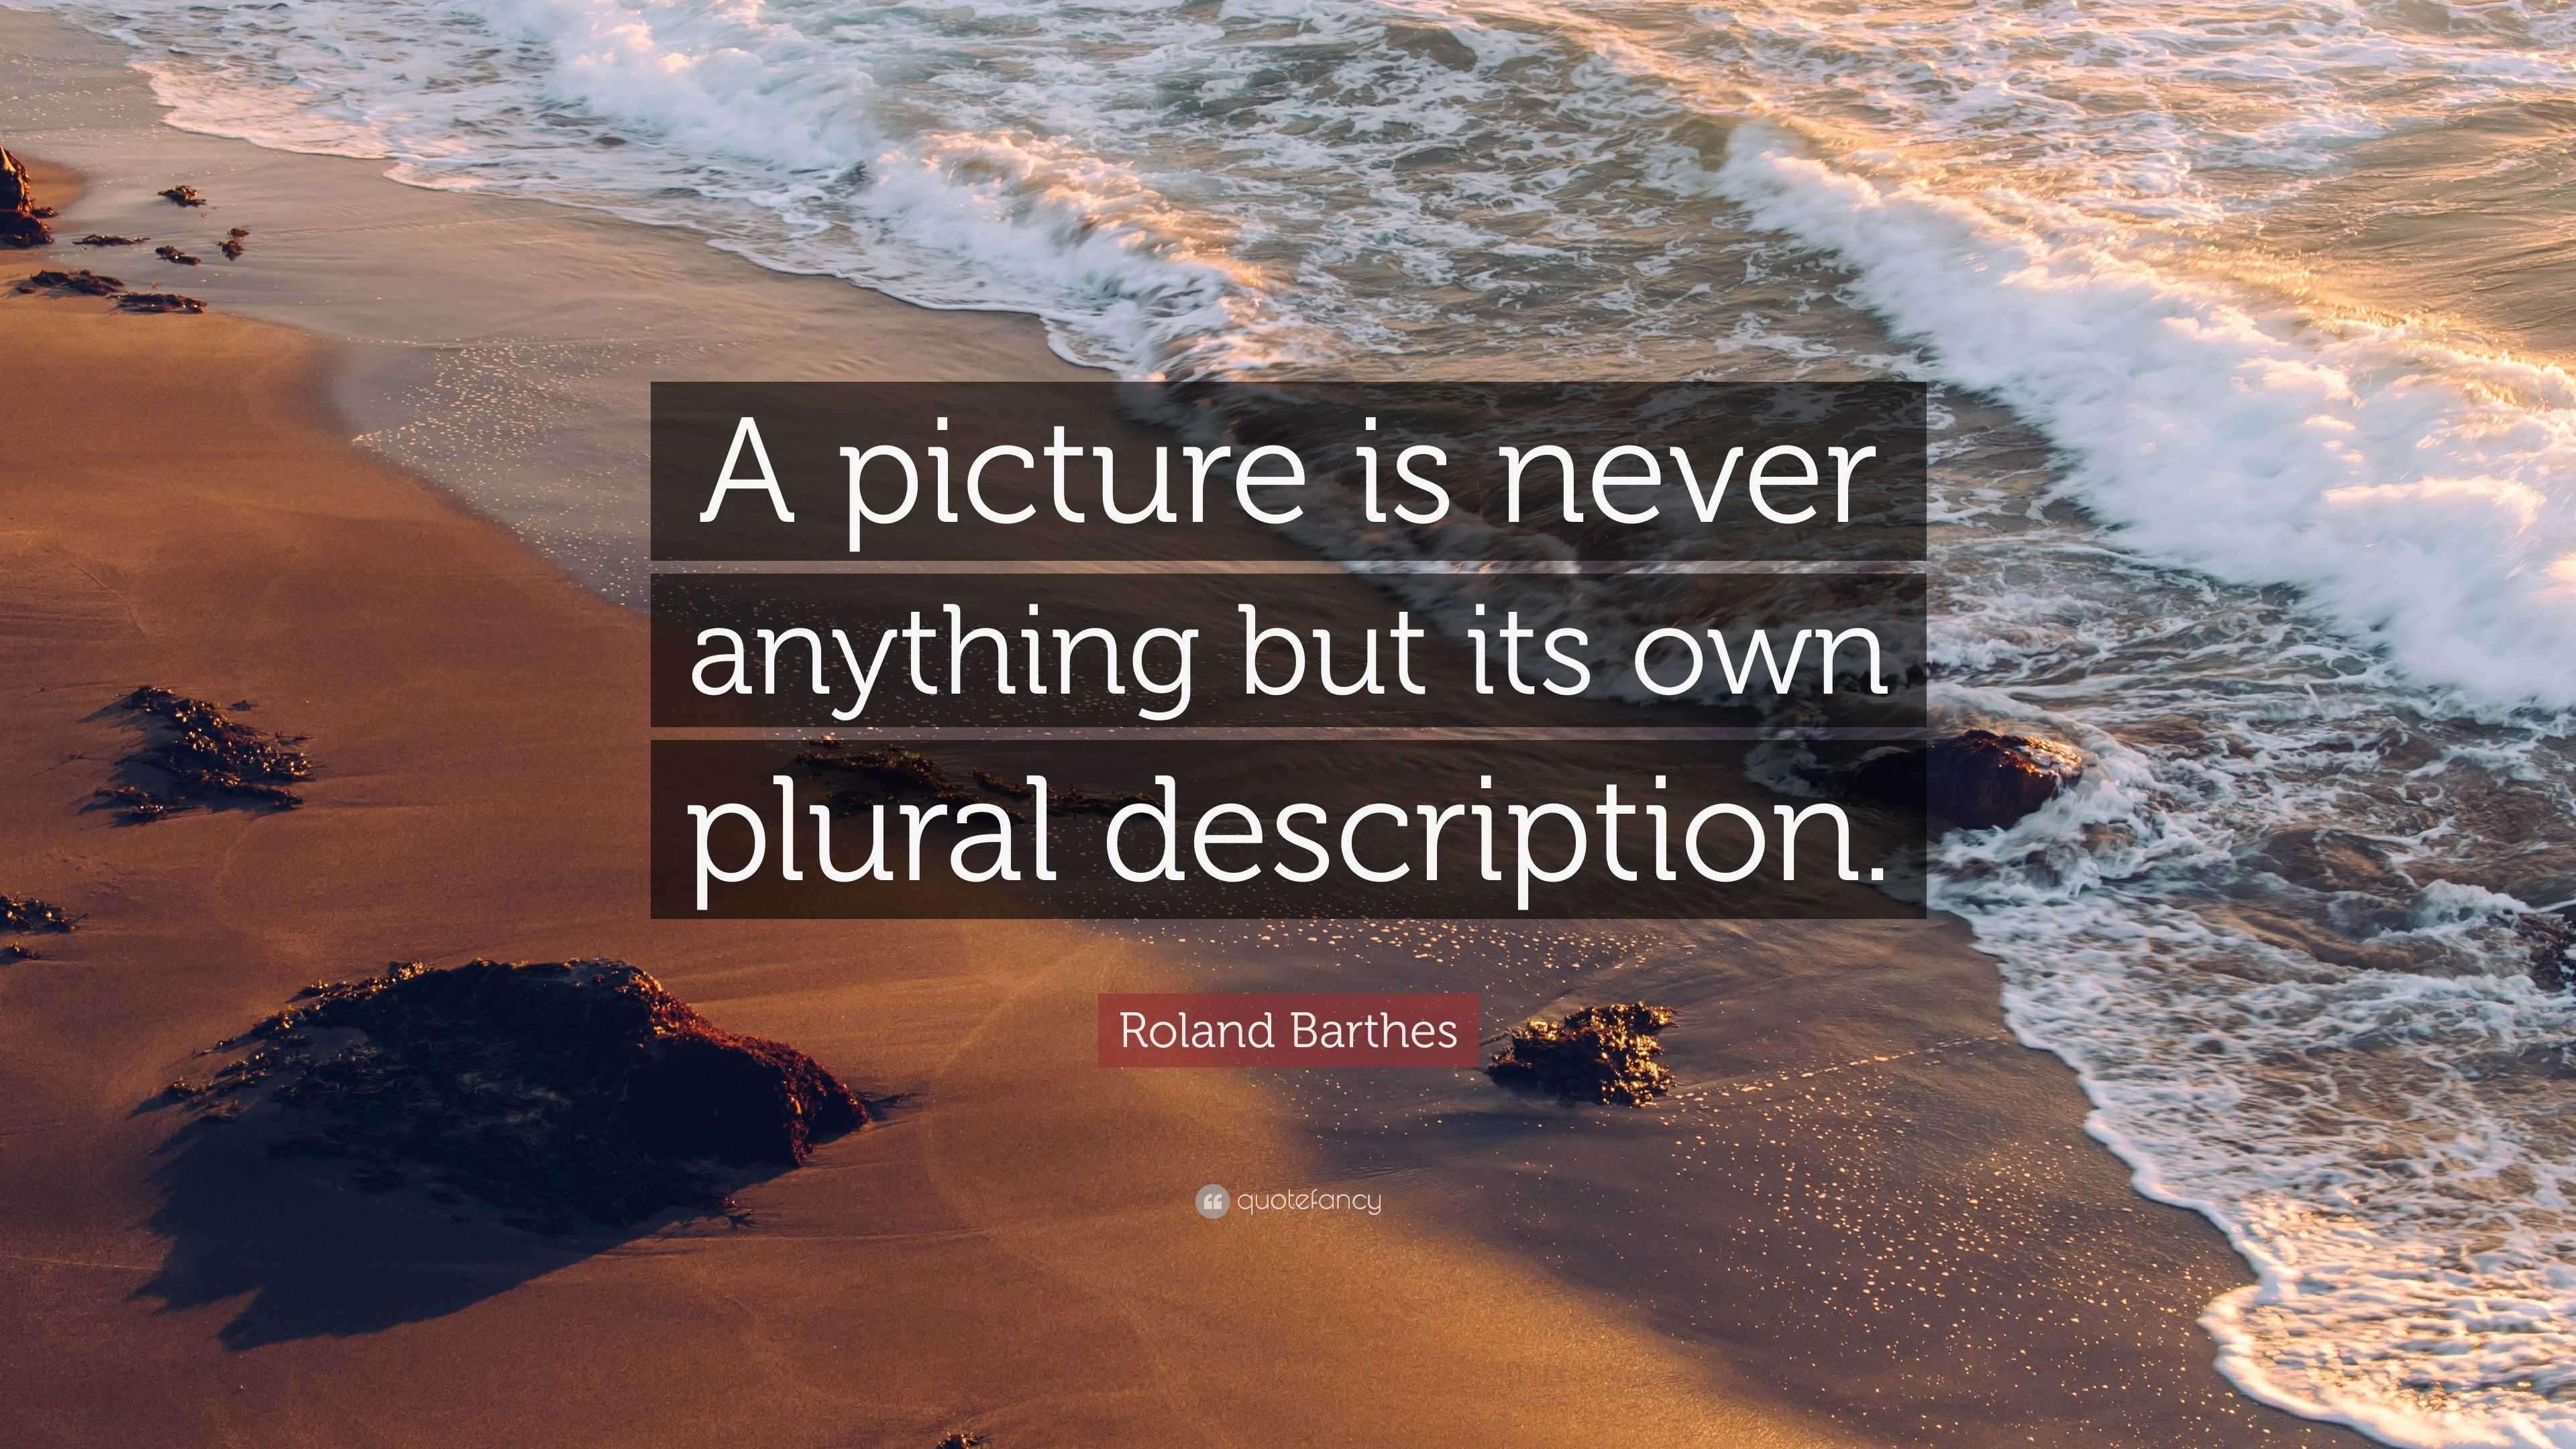 Roland Barthes Quote: “A picture is never anything but its own plural ...